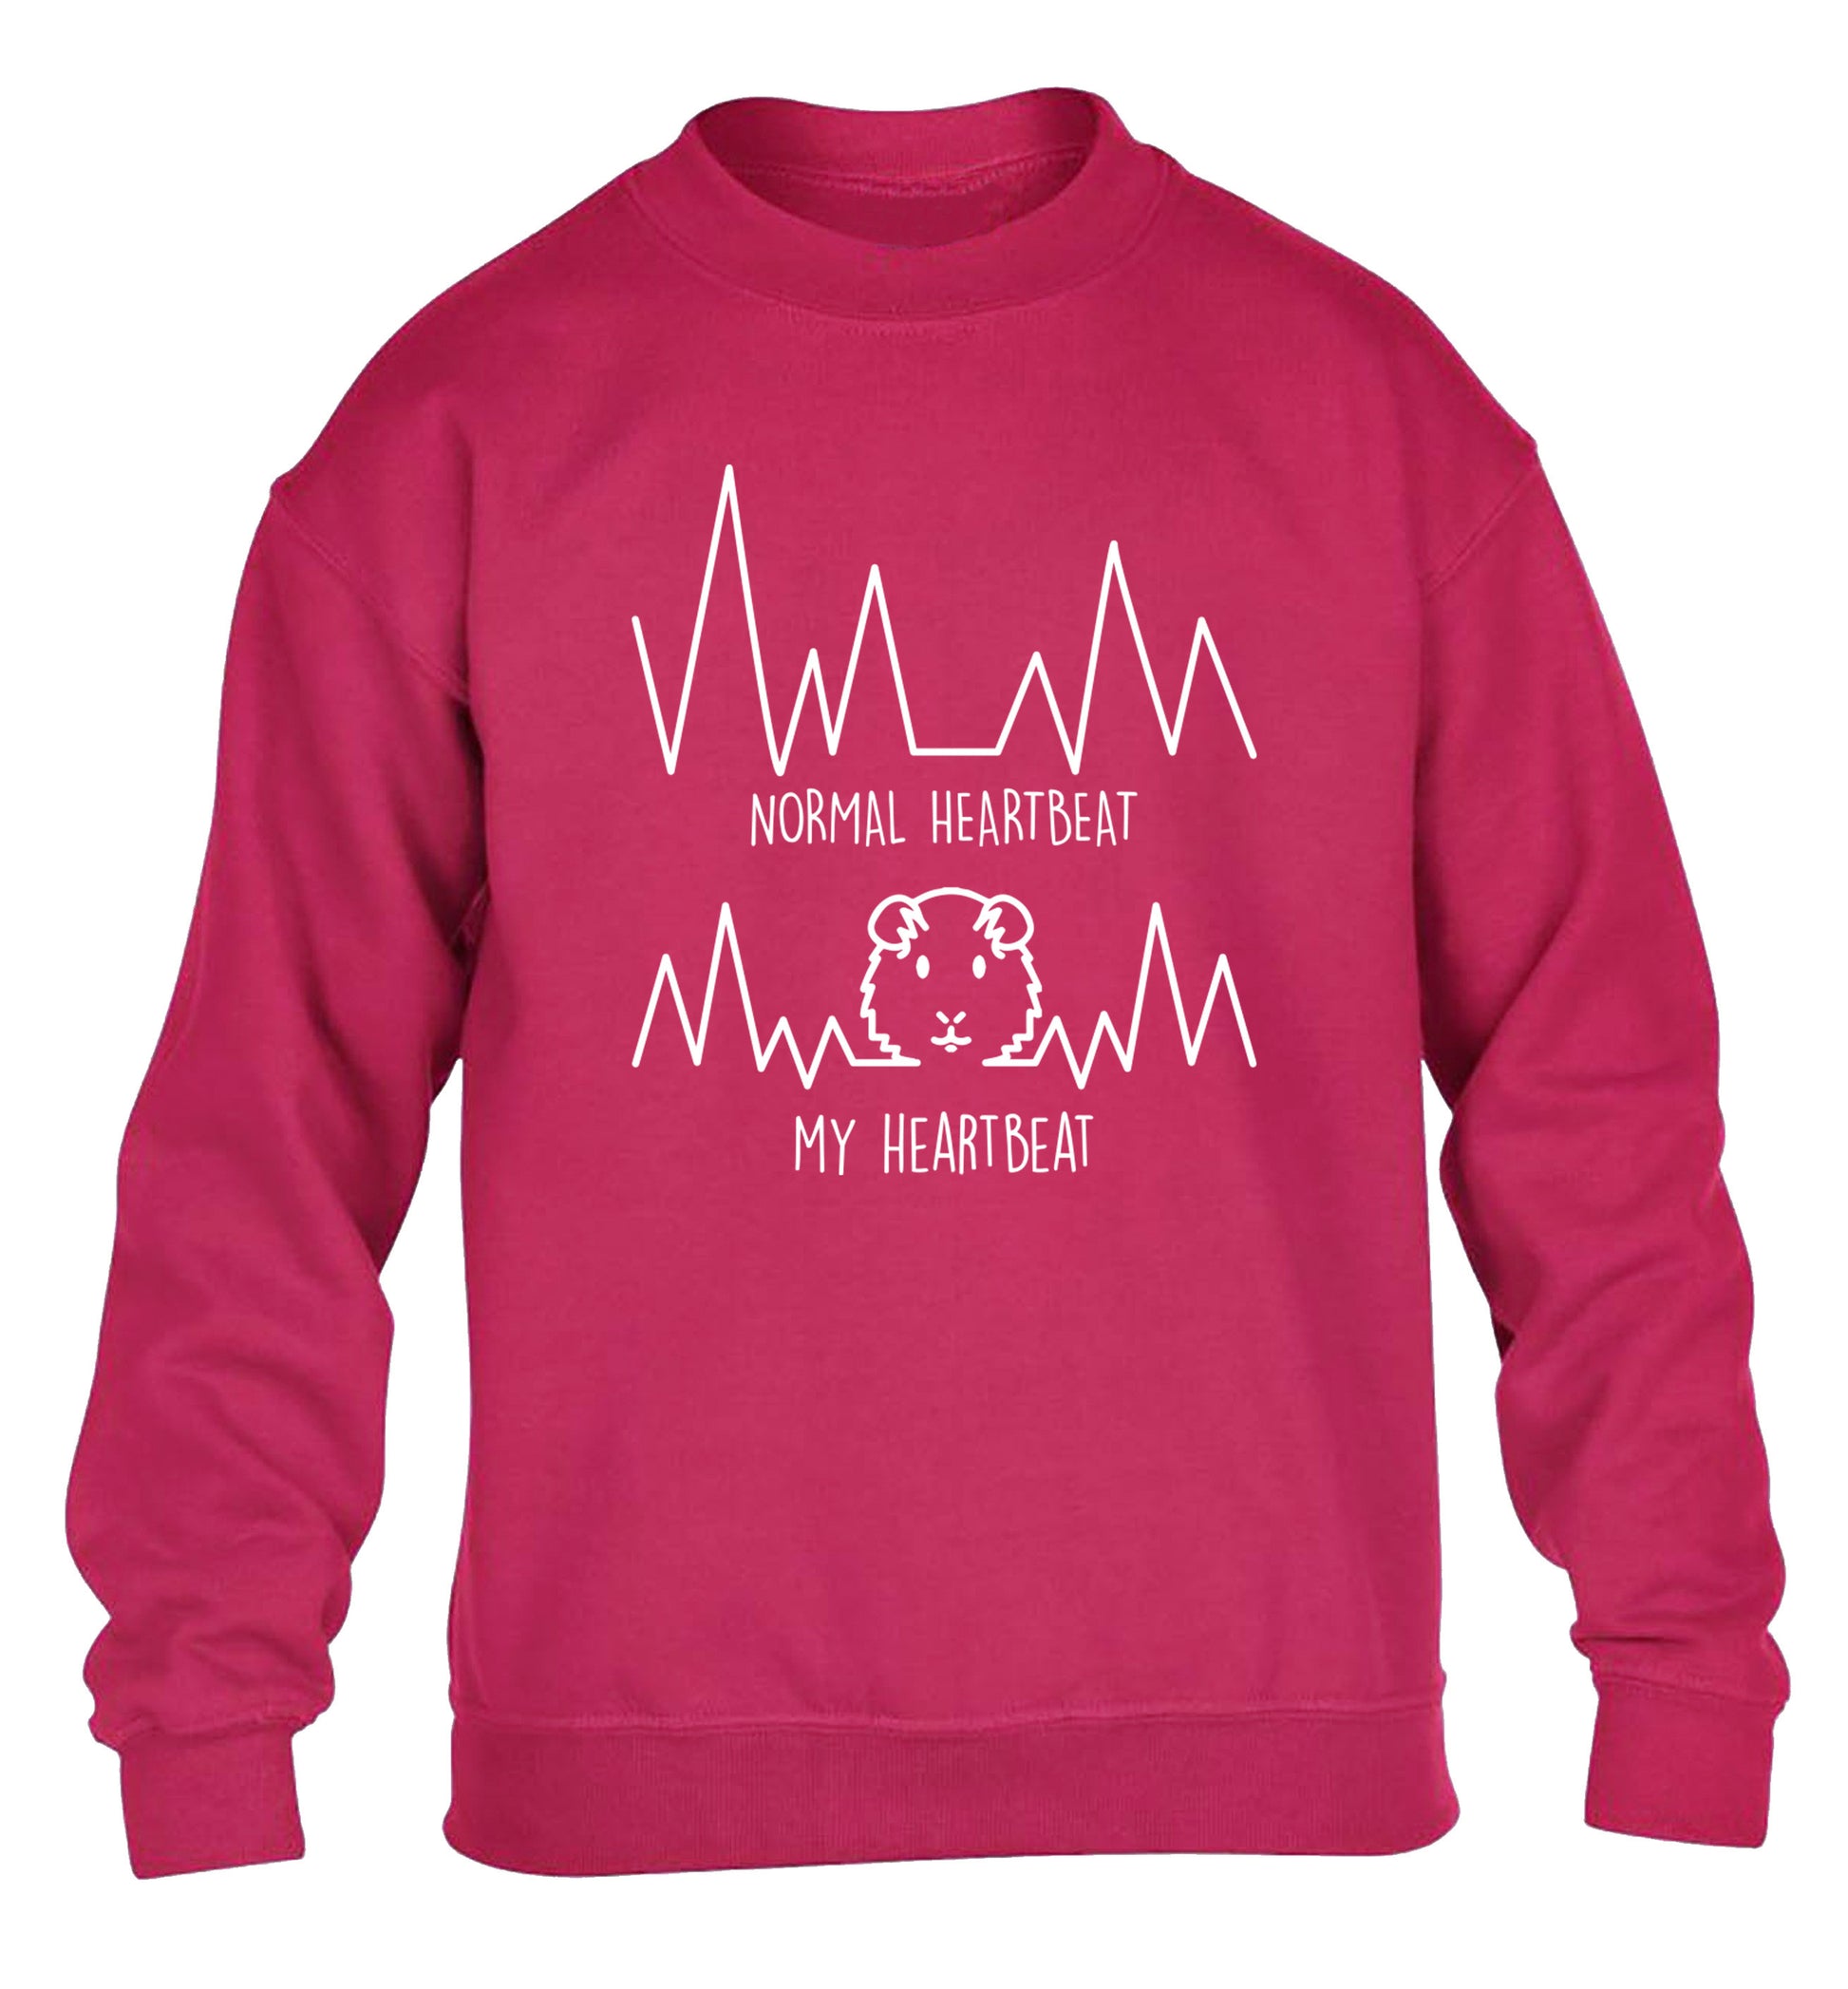 Normal heartbeat vs my heartbeat guinea pig lover children's pink  sweater 12-14 Years